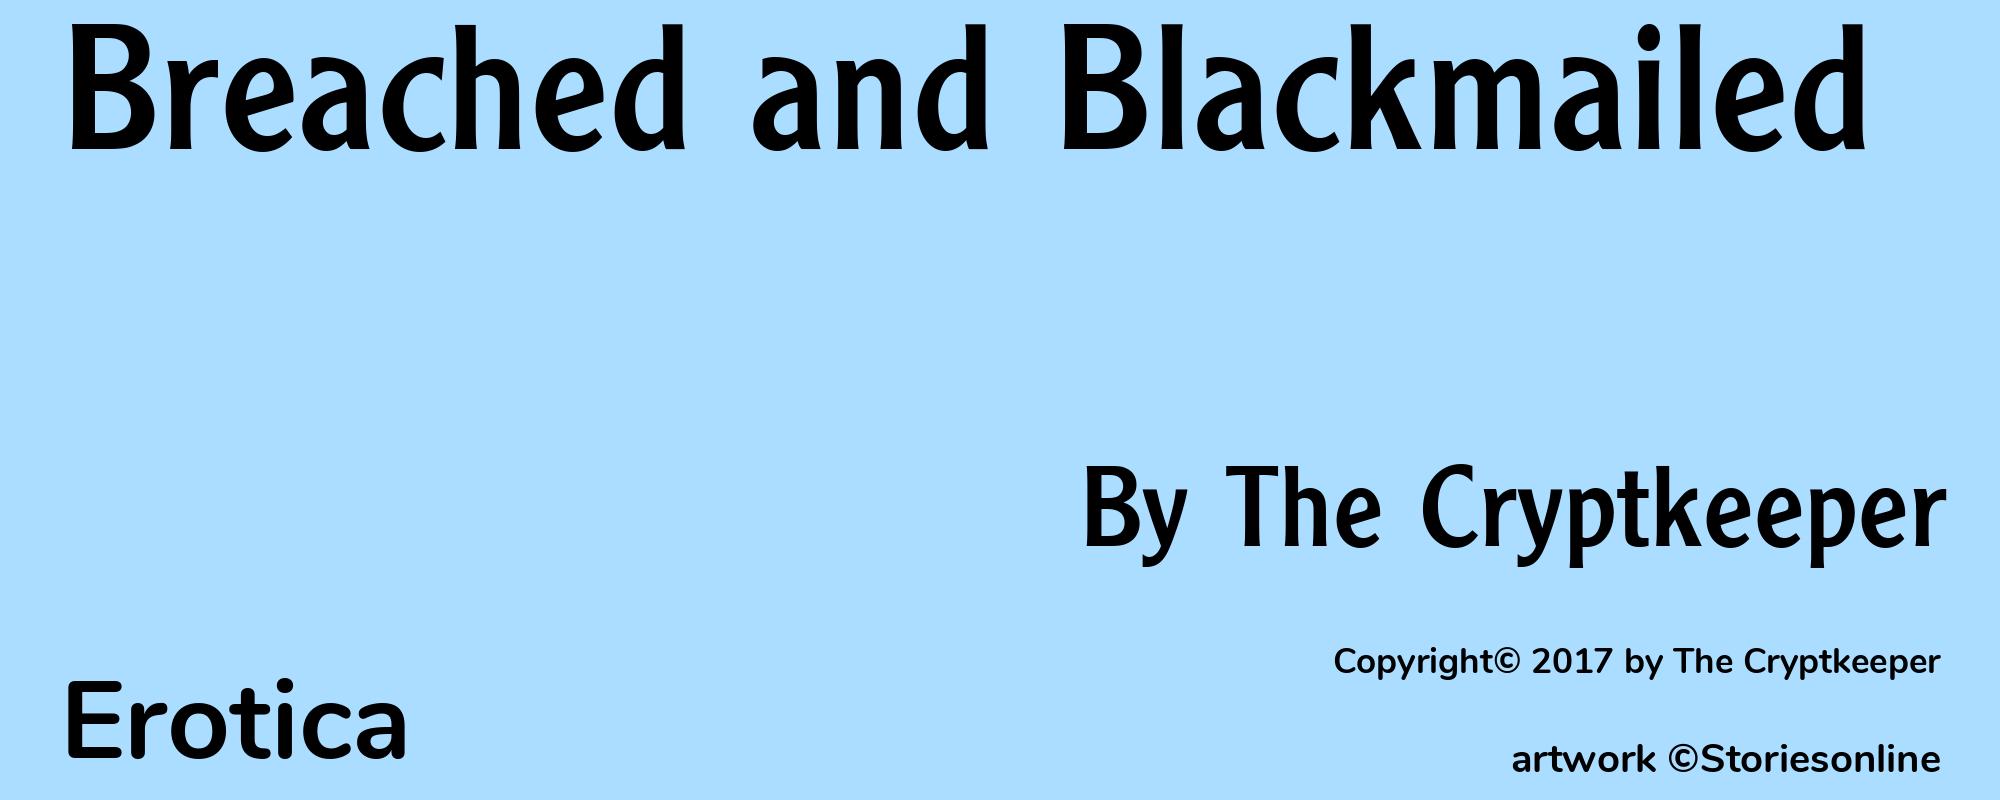 Breached and Blackmailed - Cover